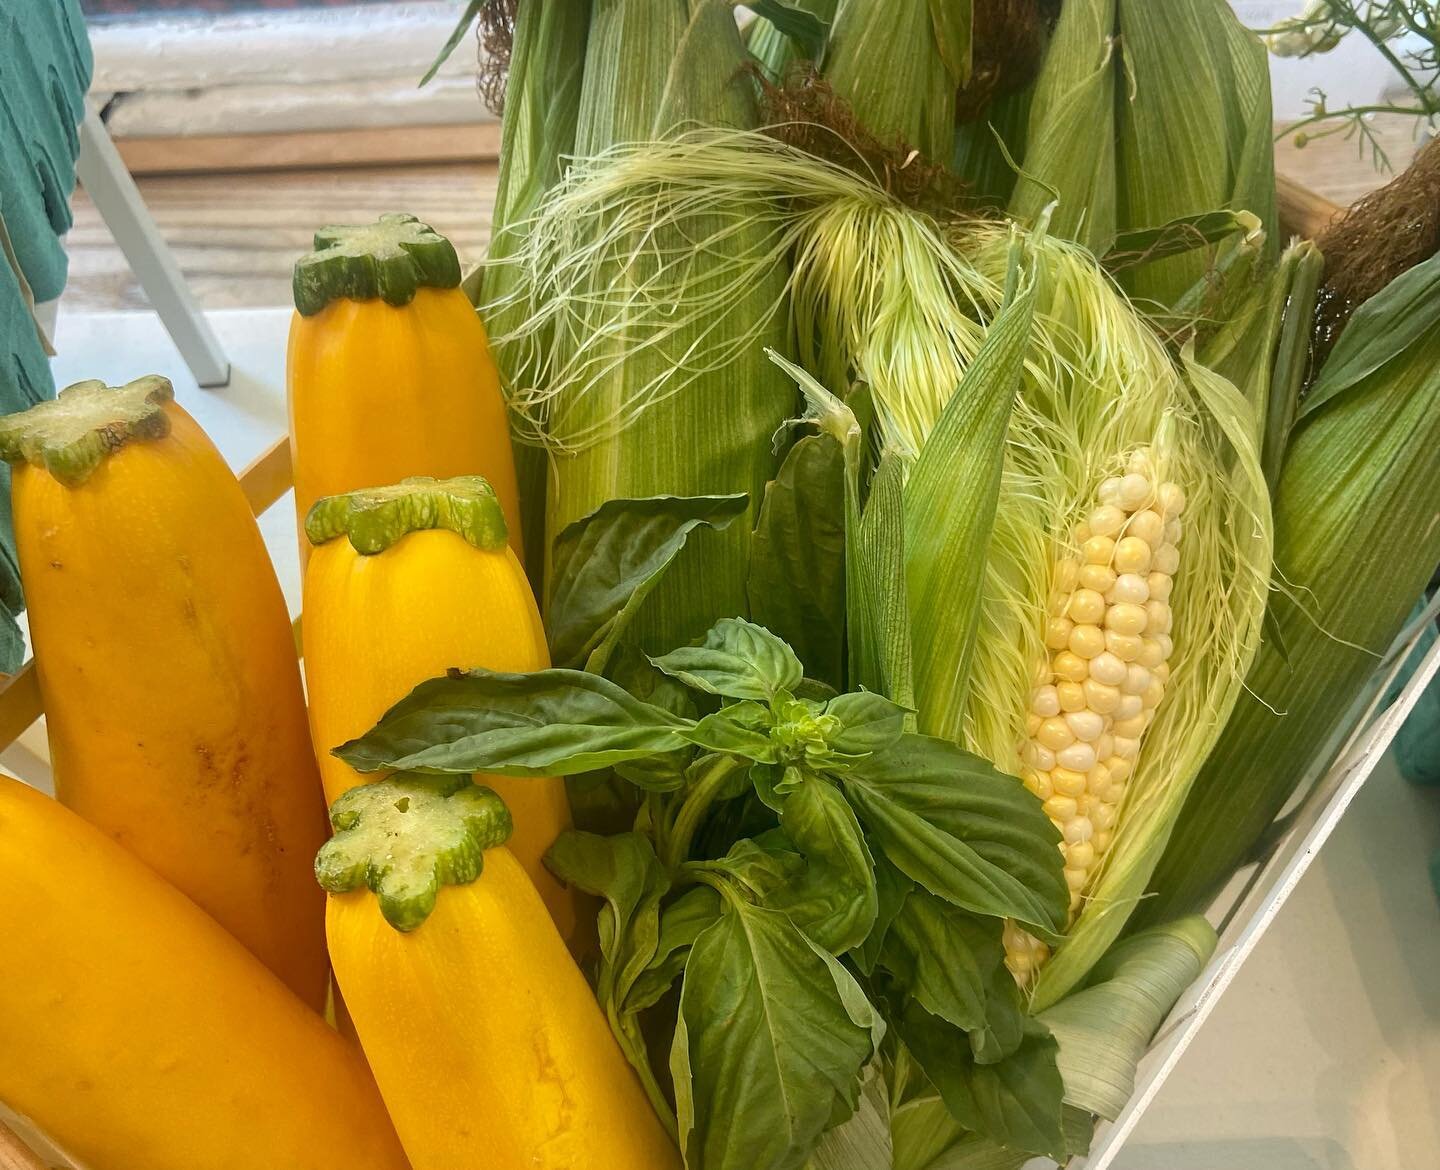 Summer produce is here! We have sweet corn, lettuce, tomatoes and more 🥬🍅🥒🥚🌽